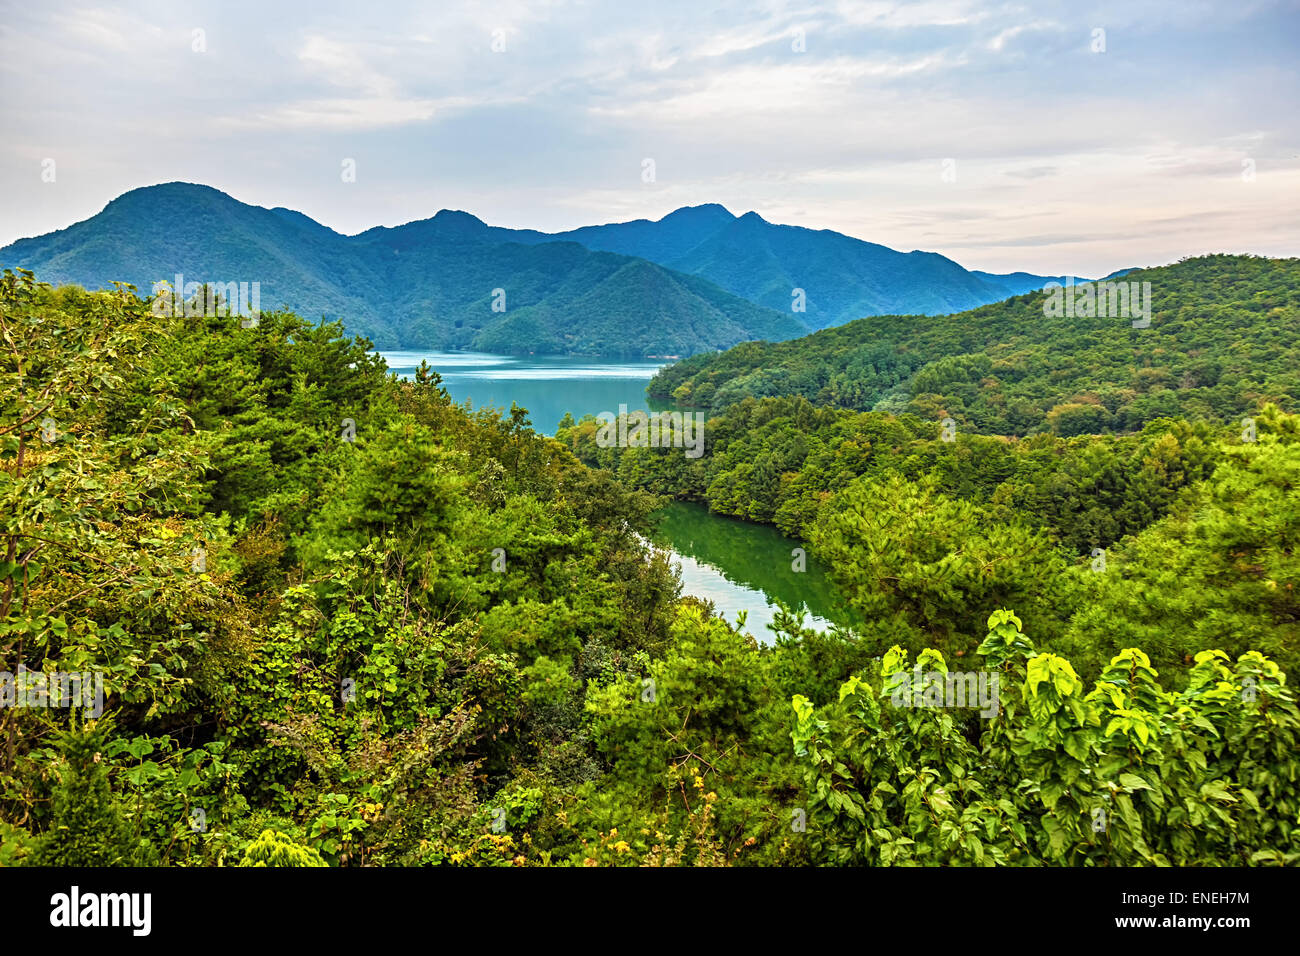 Mountains with green trees and lake landscape in South Korea Stock Photo